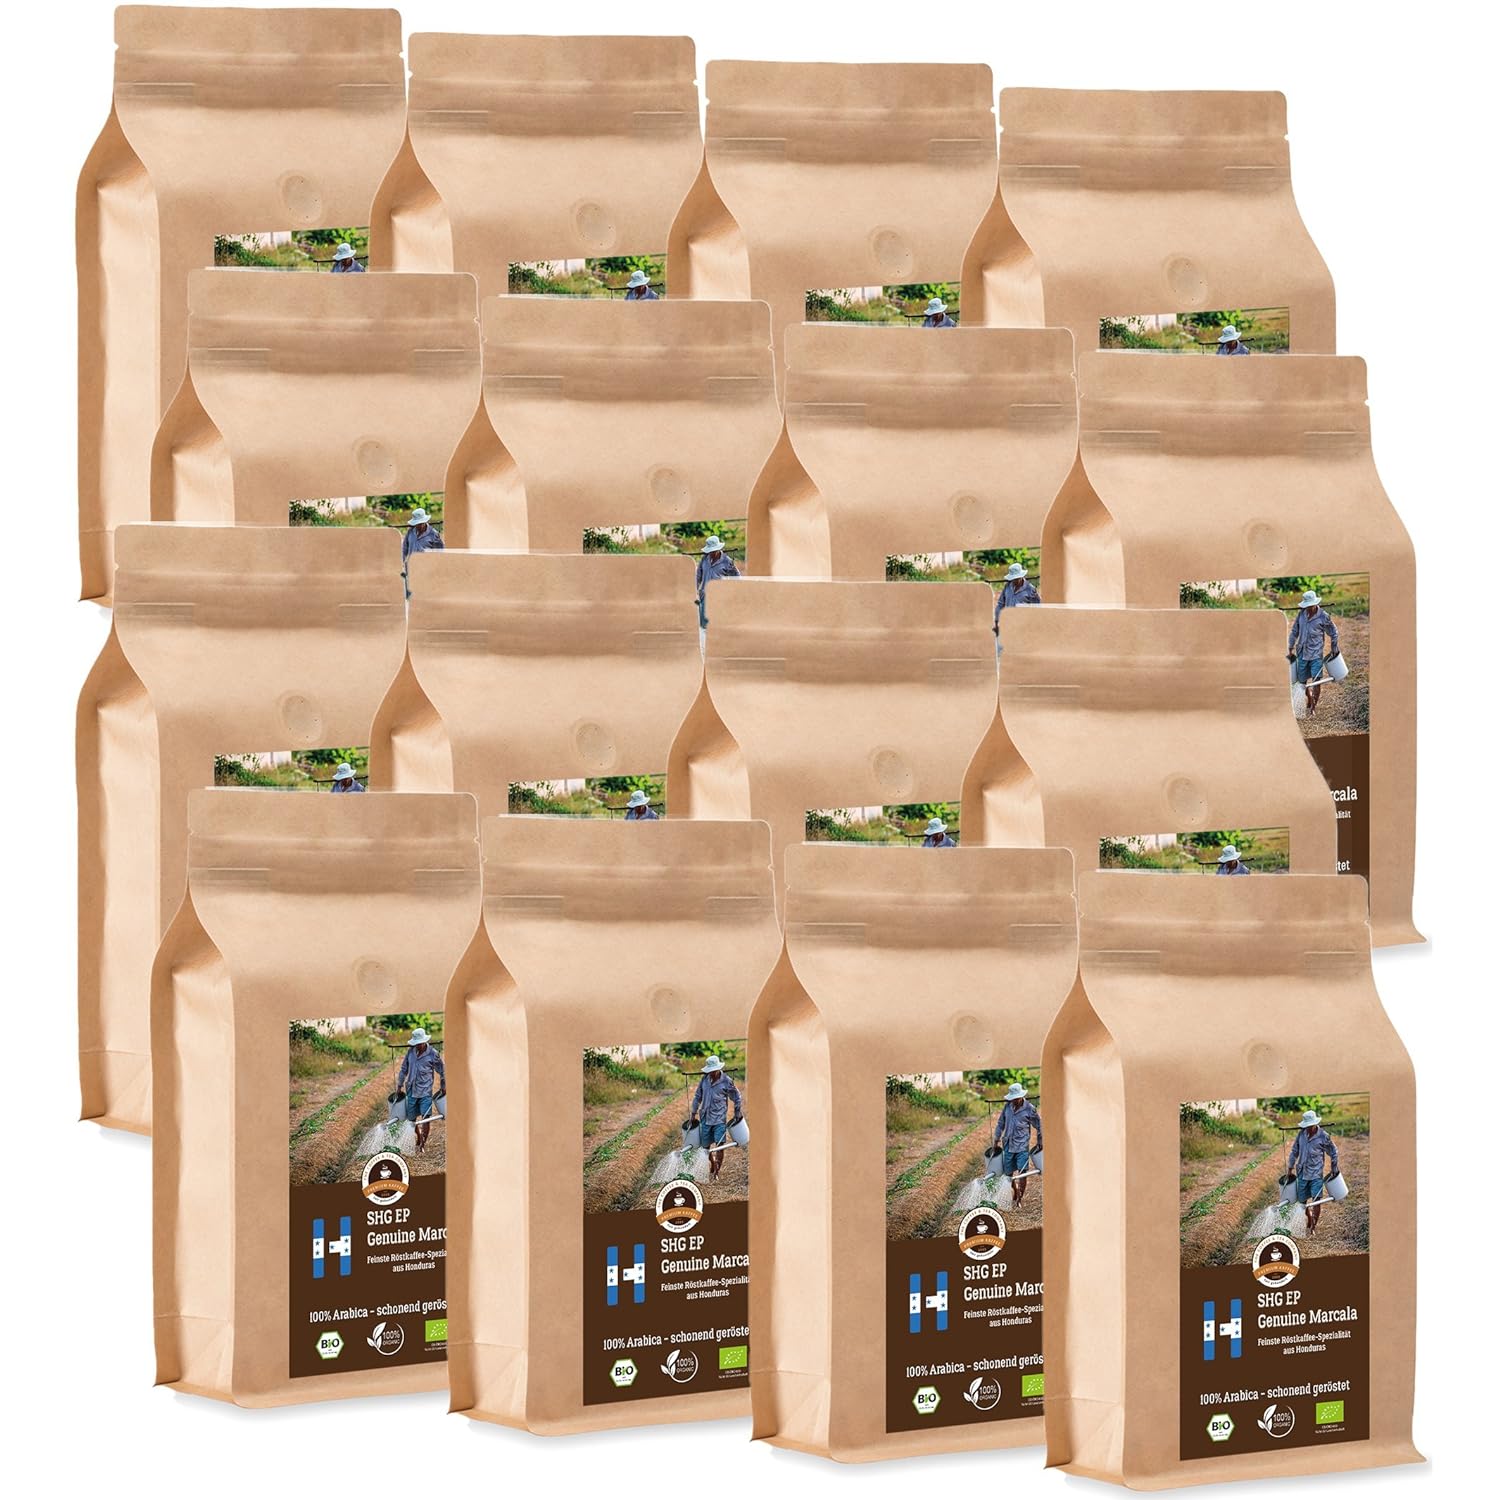 Coffee Globetrotter - Organic Honduras Genuine Marcala - 16 x 1000 g Very Fine Ground - for Fully Automatic Coffee Grinder - Roasted Coffee from Organic Cultivation | Gastropack Economy Pack